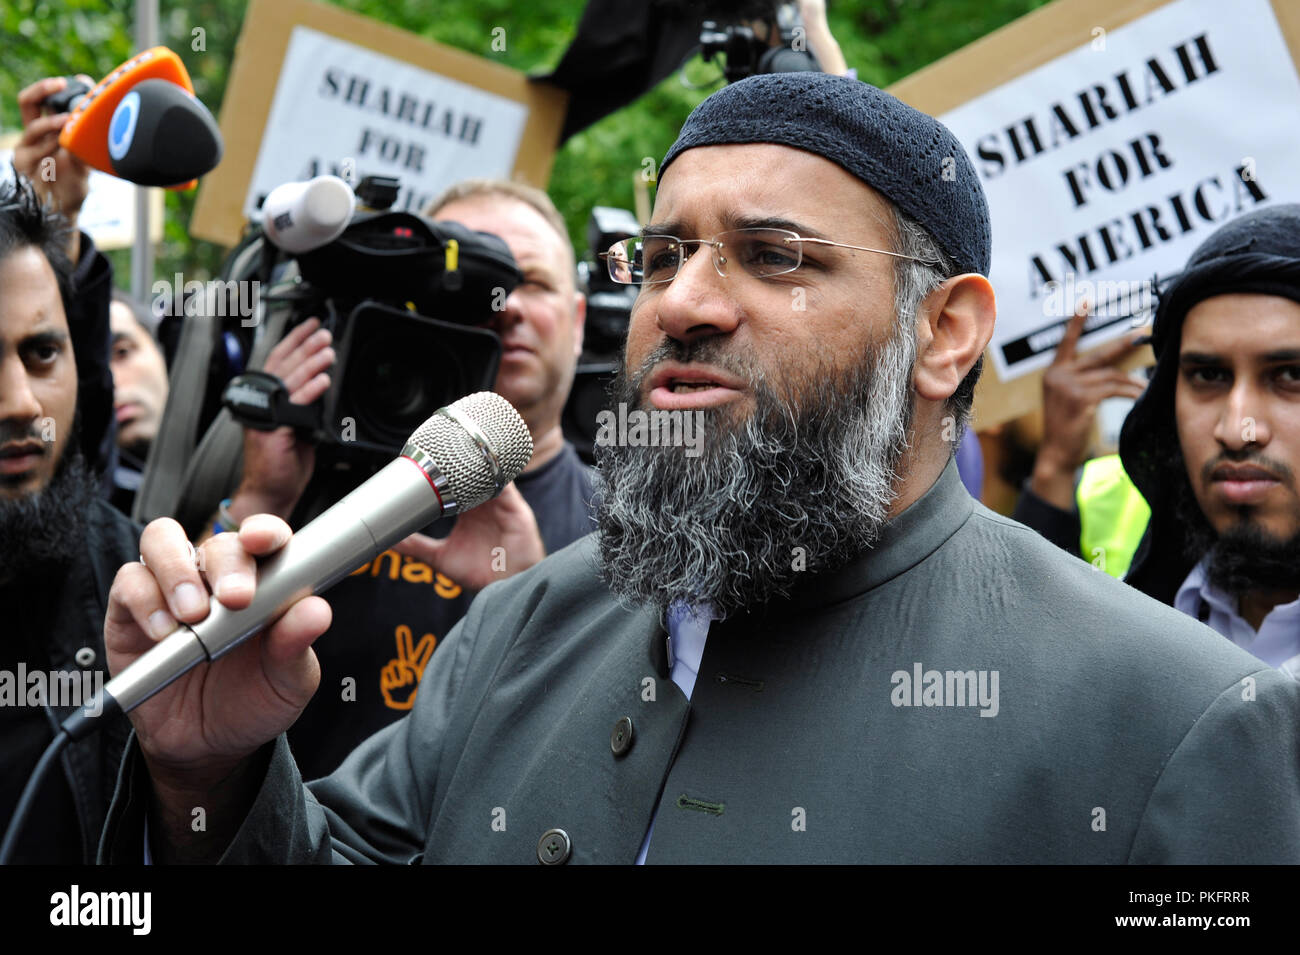 Anjem Choudary of the Muslims Against Crusades (MAC) group formerly of Islam4UK. He was convicted of inviting support for a proscribed organisation Stock Photo